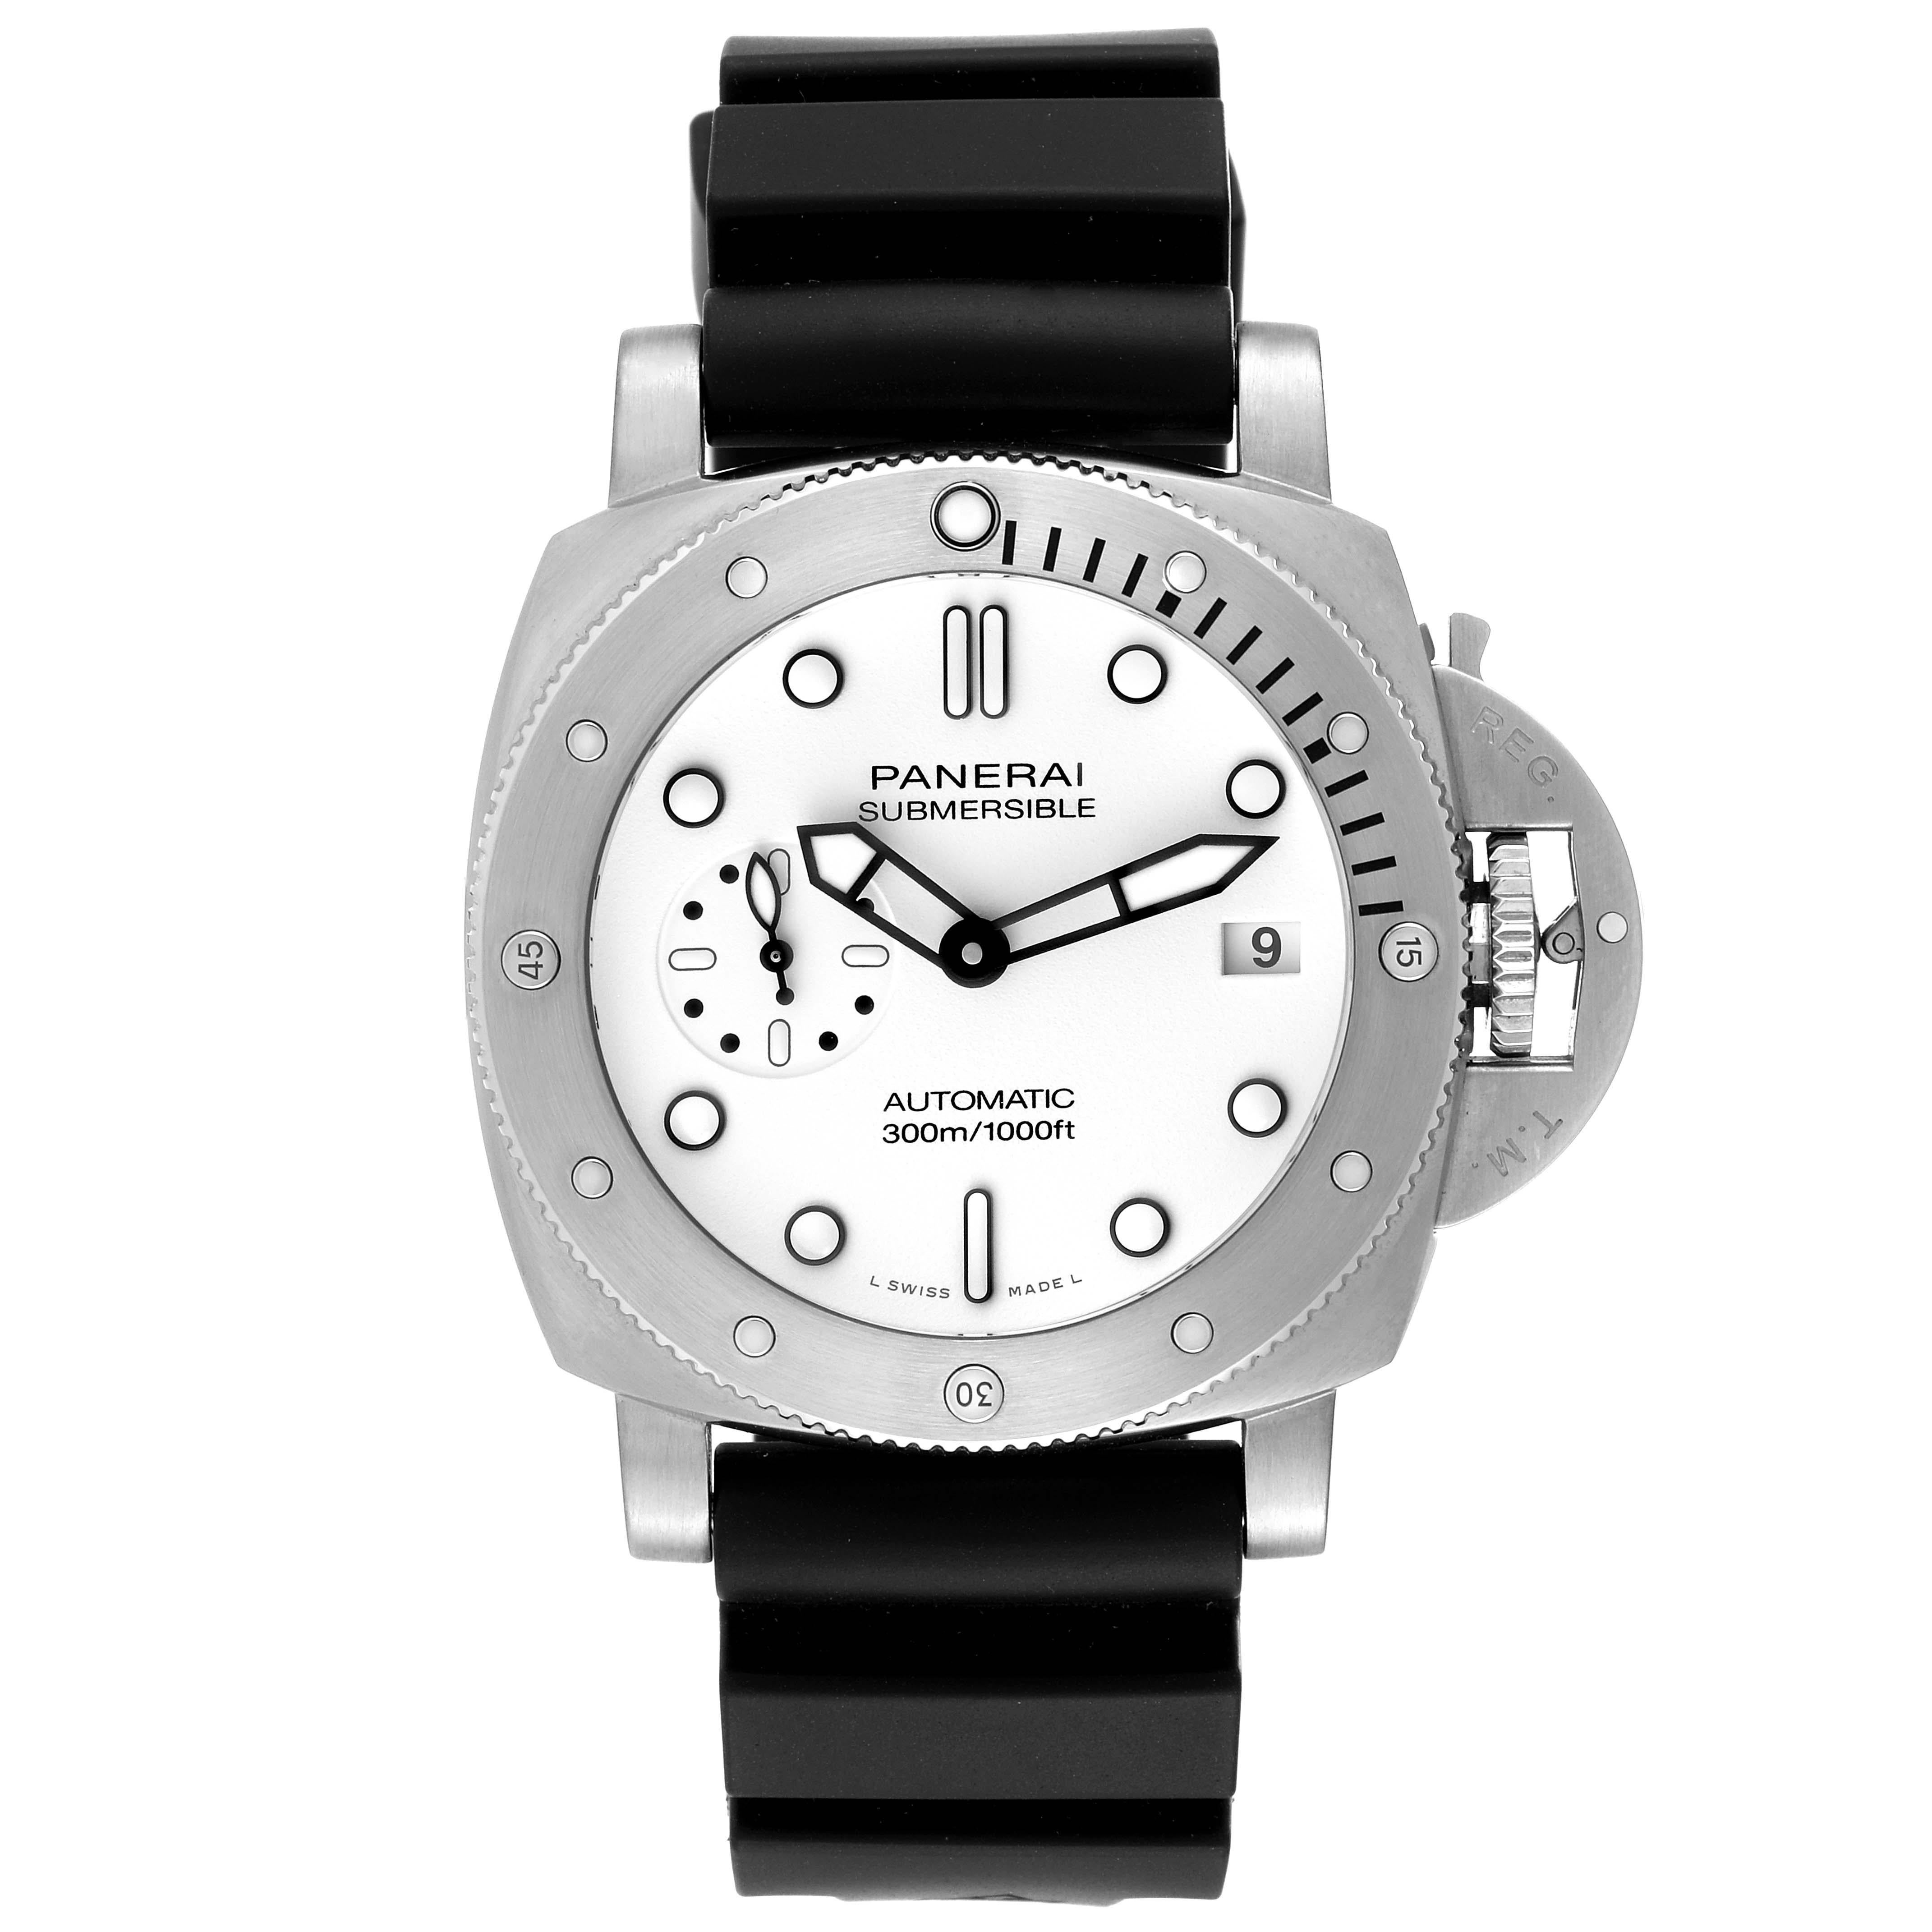 Panerai Submersible Bianco 42mm White Dial Steel Mens Watch PAM01223 Box Card. Automatic self-winding movement. Two part cushion shaped stainless steel case 42.0 mm in diameter. Panerai patented crown protector. Steel anti-clockwise unidirectional